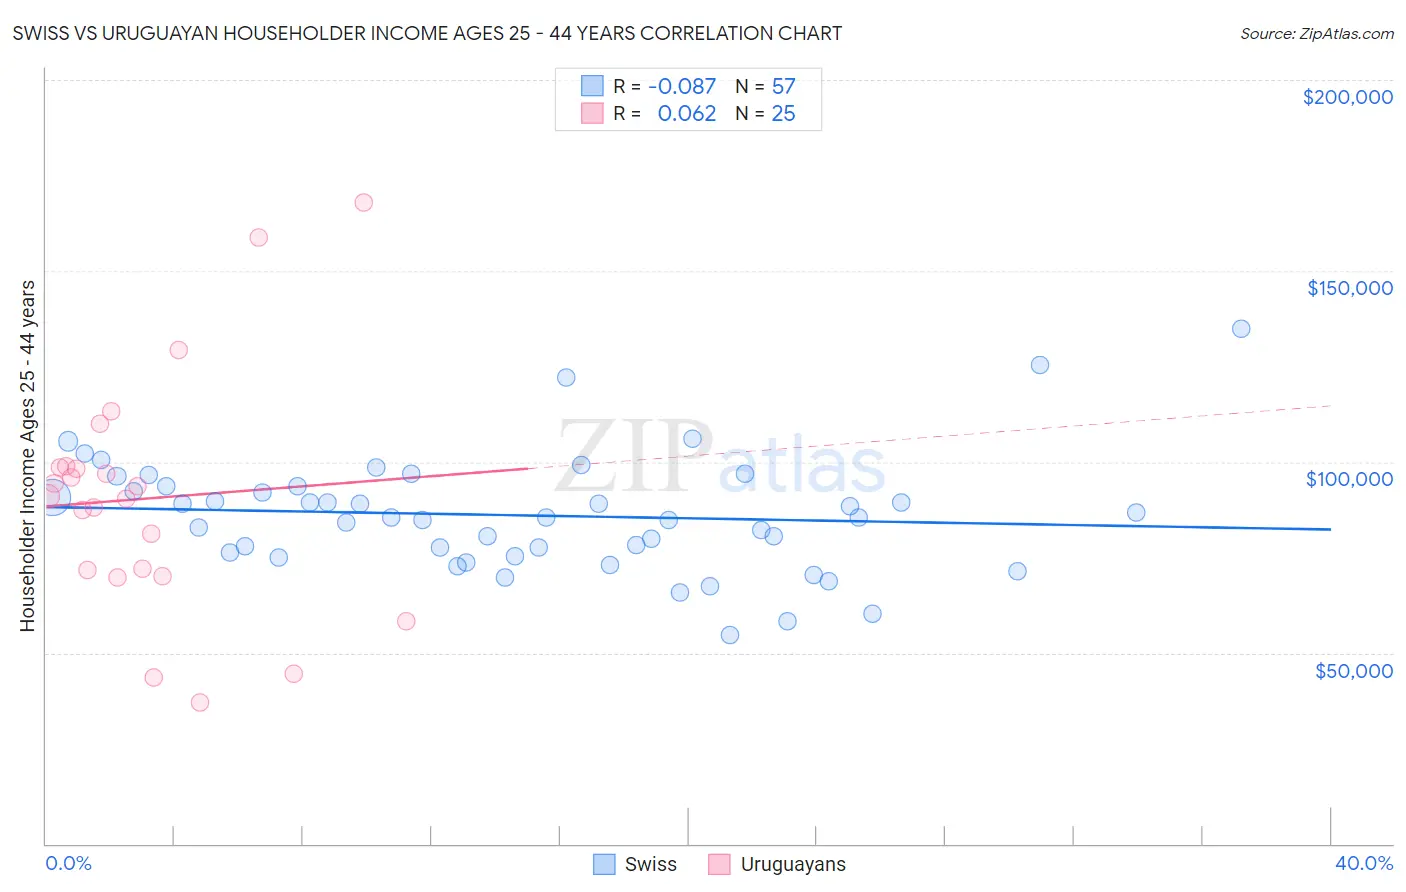 Swiss vs Uruguayan Householder Income Ages 25 - 44 years